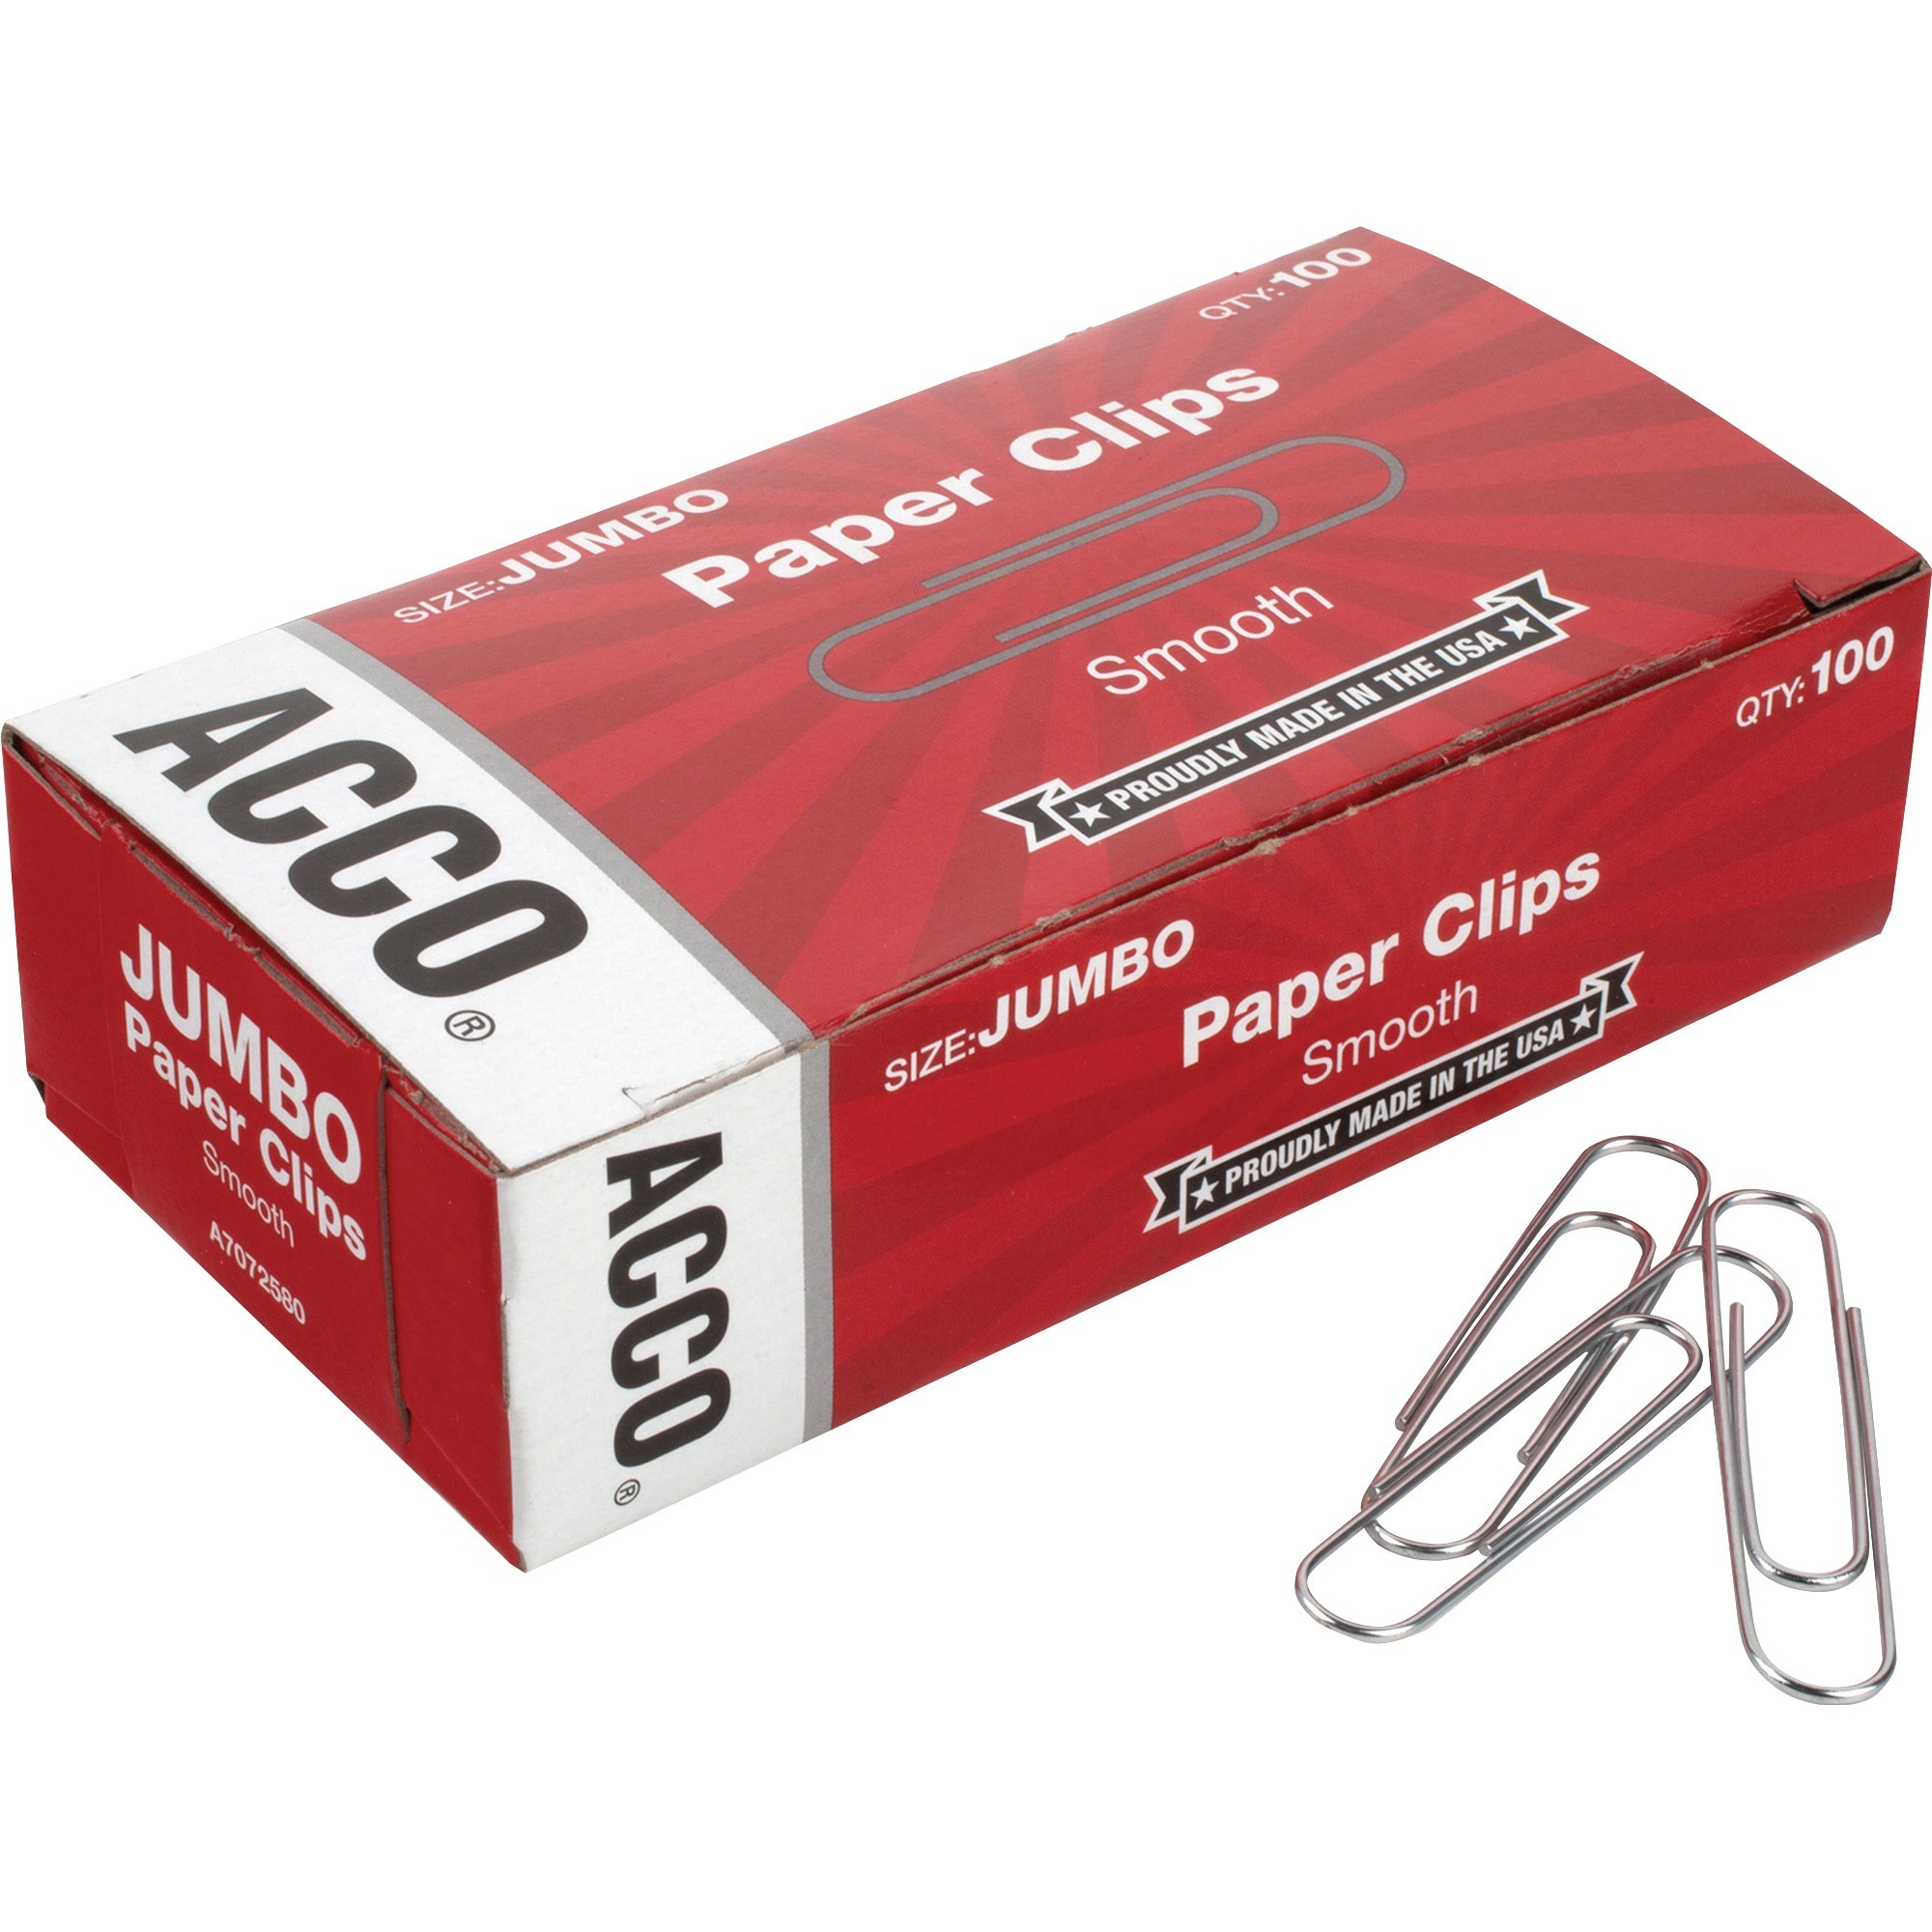 Alago AL-100 Paper Clips, 700 pcs Paper Clips Assorted Sizes, Large,  Medium, Small #1 Metal Paperclips, 2 Inch Jumbo/Mini Silver Paper Clip f